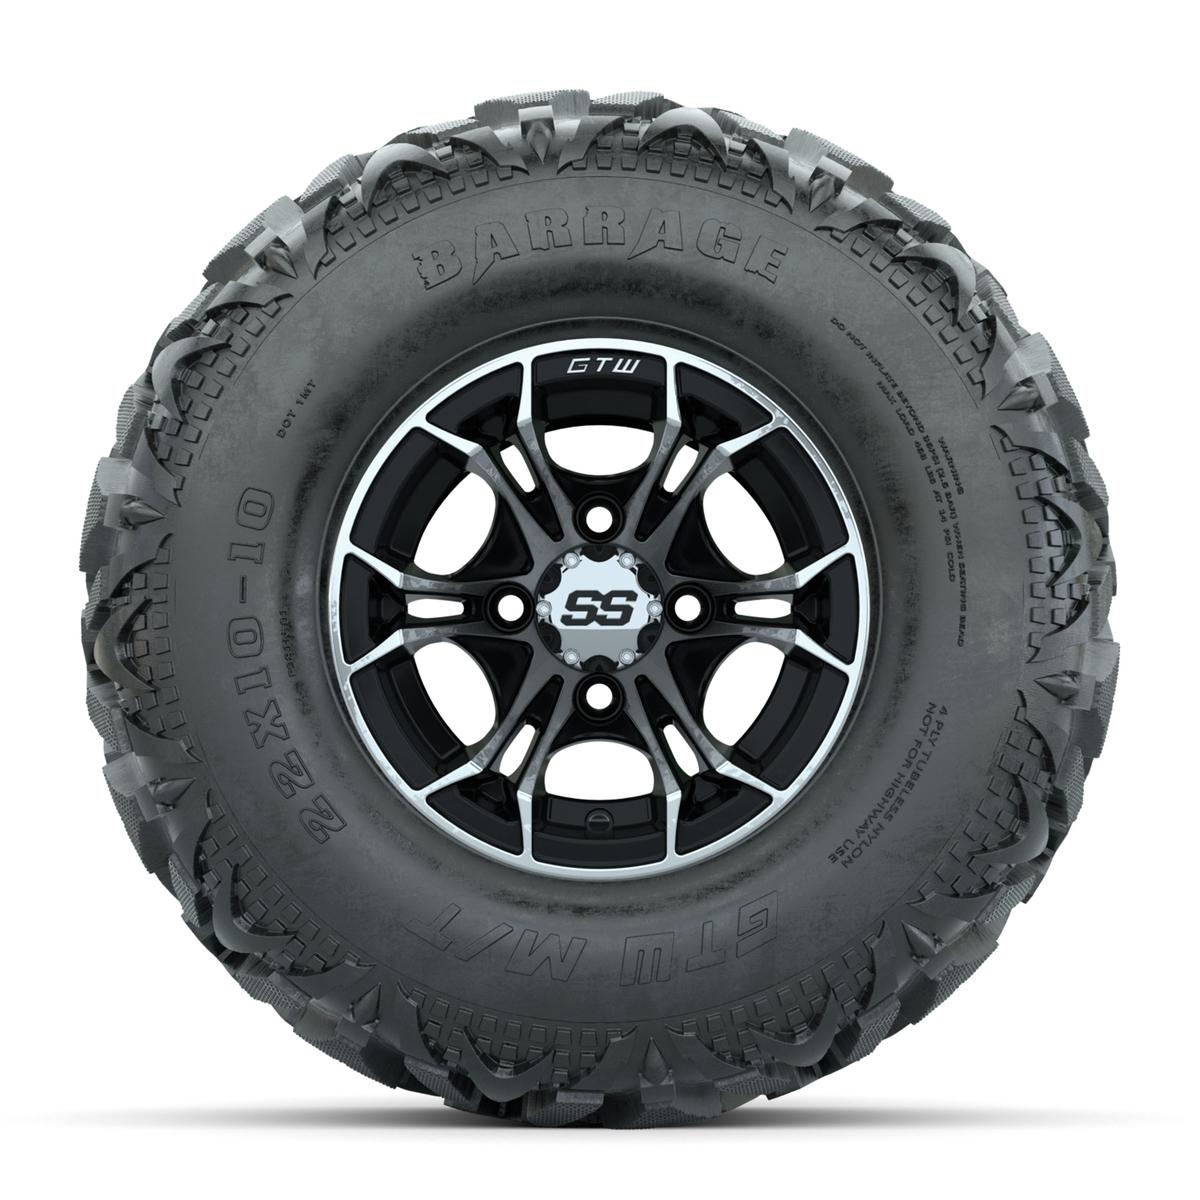 GTW Spyder Machined/Black 10 in Wheels with 22x10-10 Barrage Mud Tires – Full Set